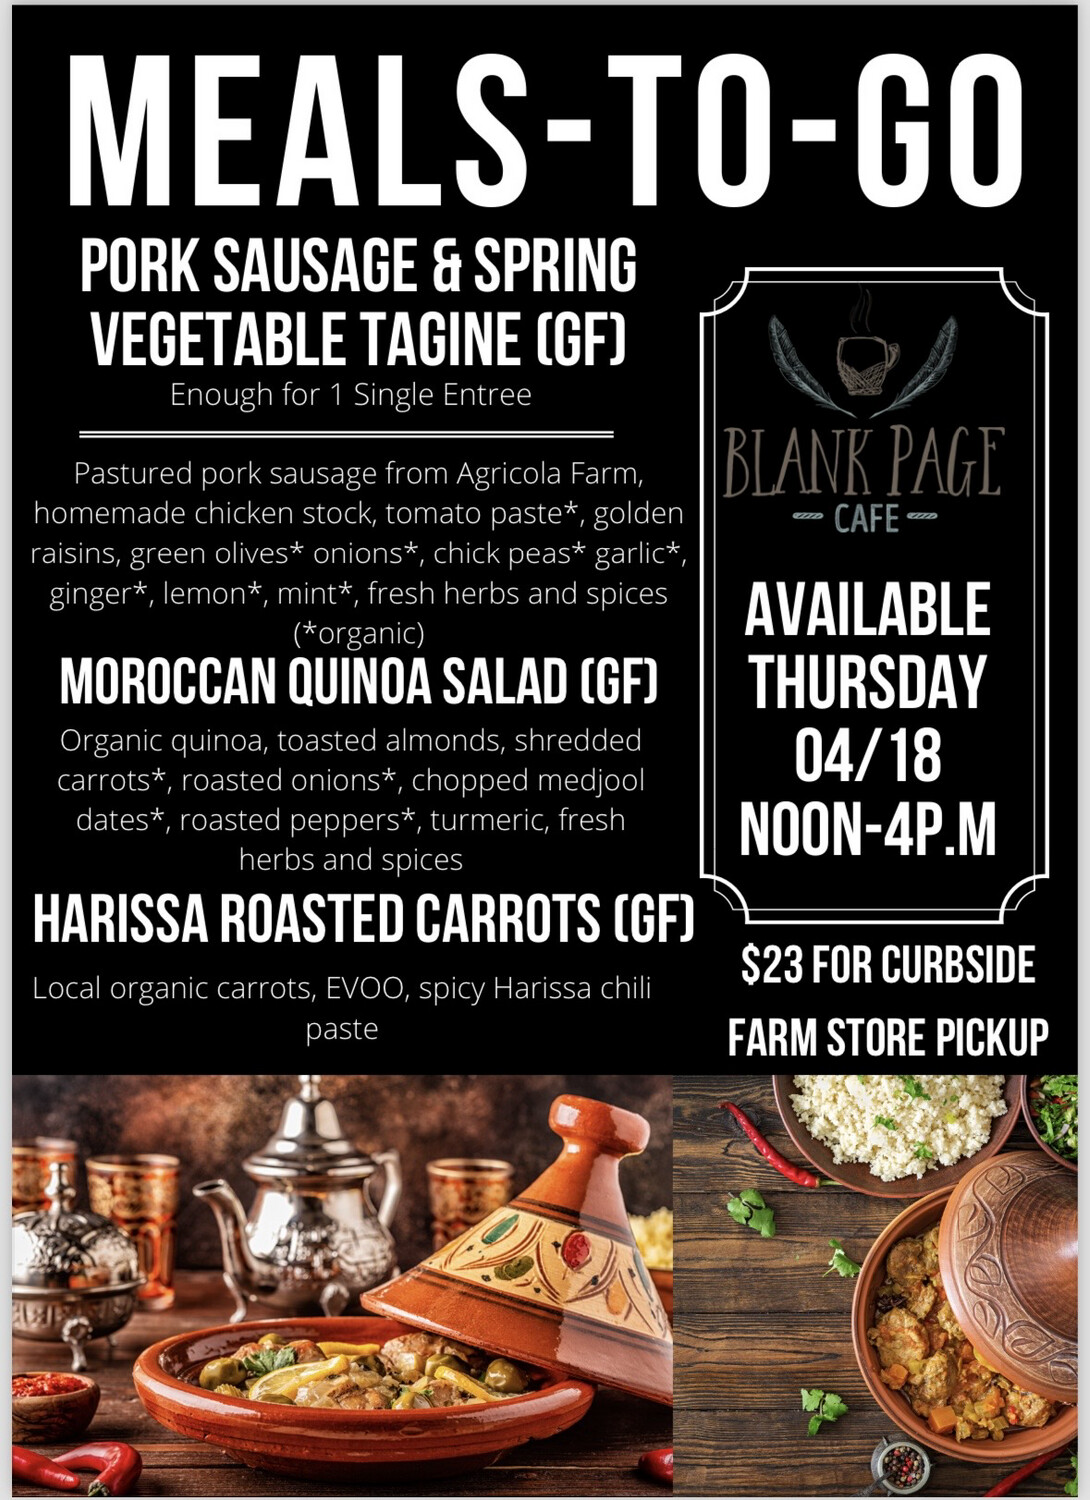 Thursday 4/04 NOON - 4PM PICKUP - Pork Sausage and Spring Vegetable Tagine + Moroccan Quinoa Salad + Harissa Roasted Carrots